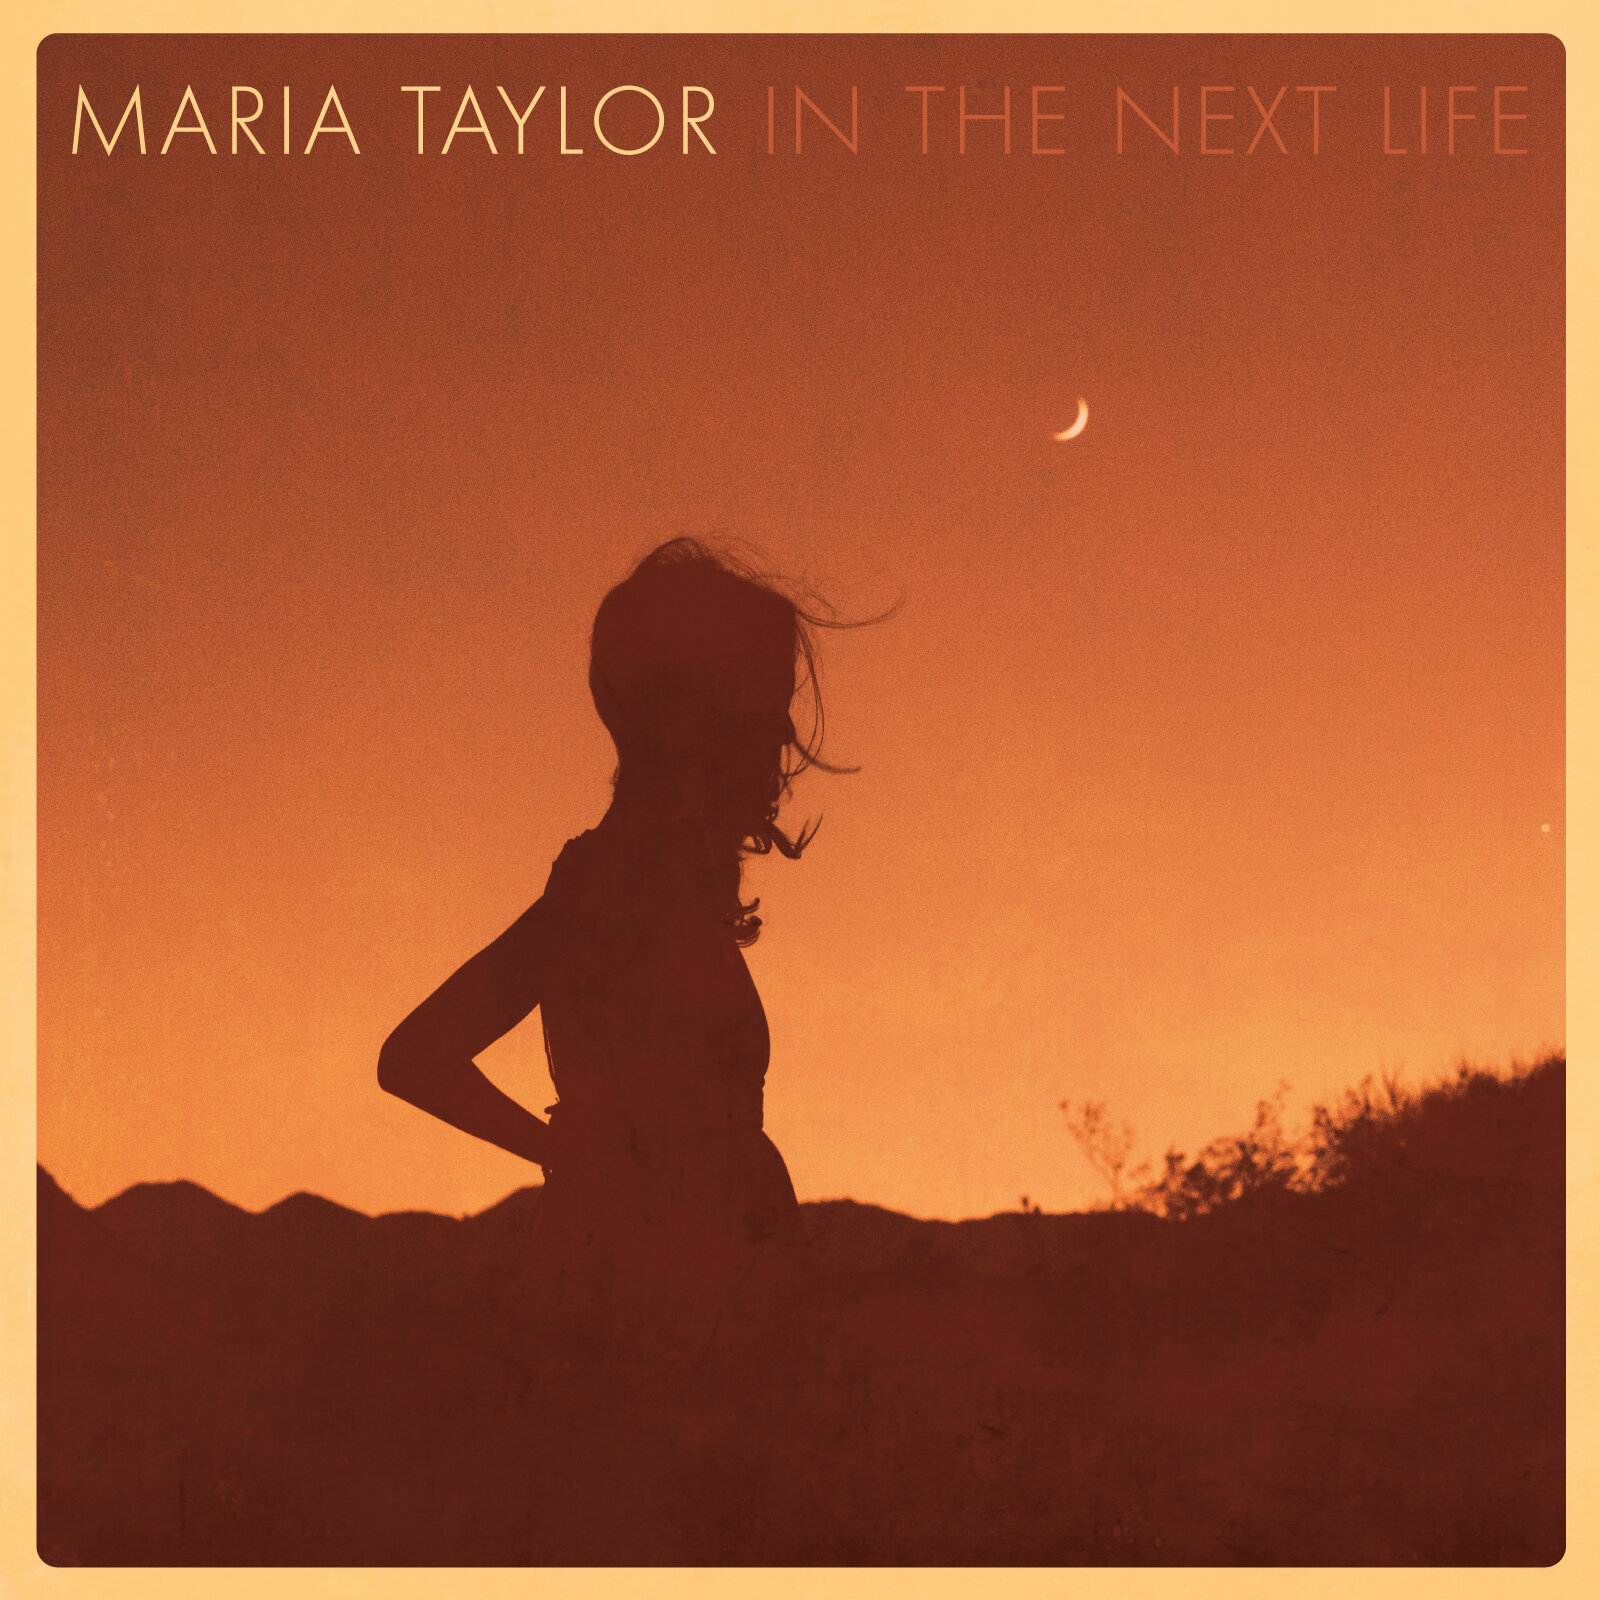 Maria Taylor — FLOWER MOON RECORDS